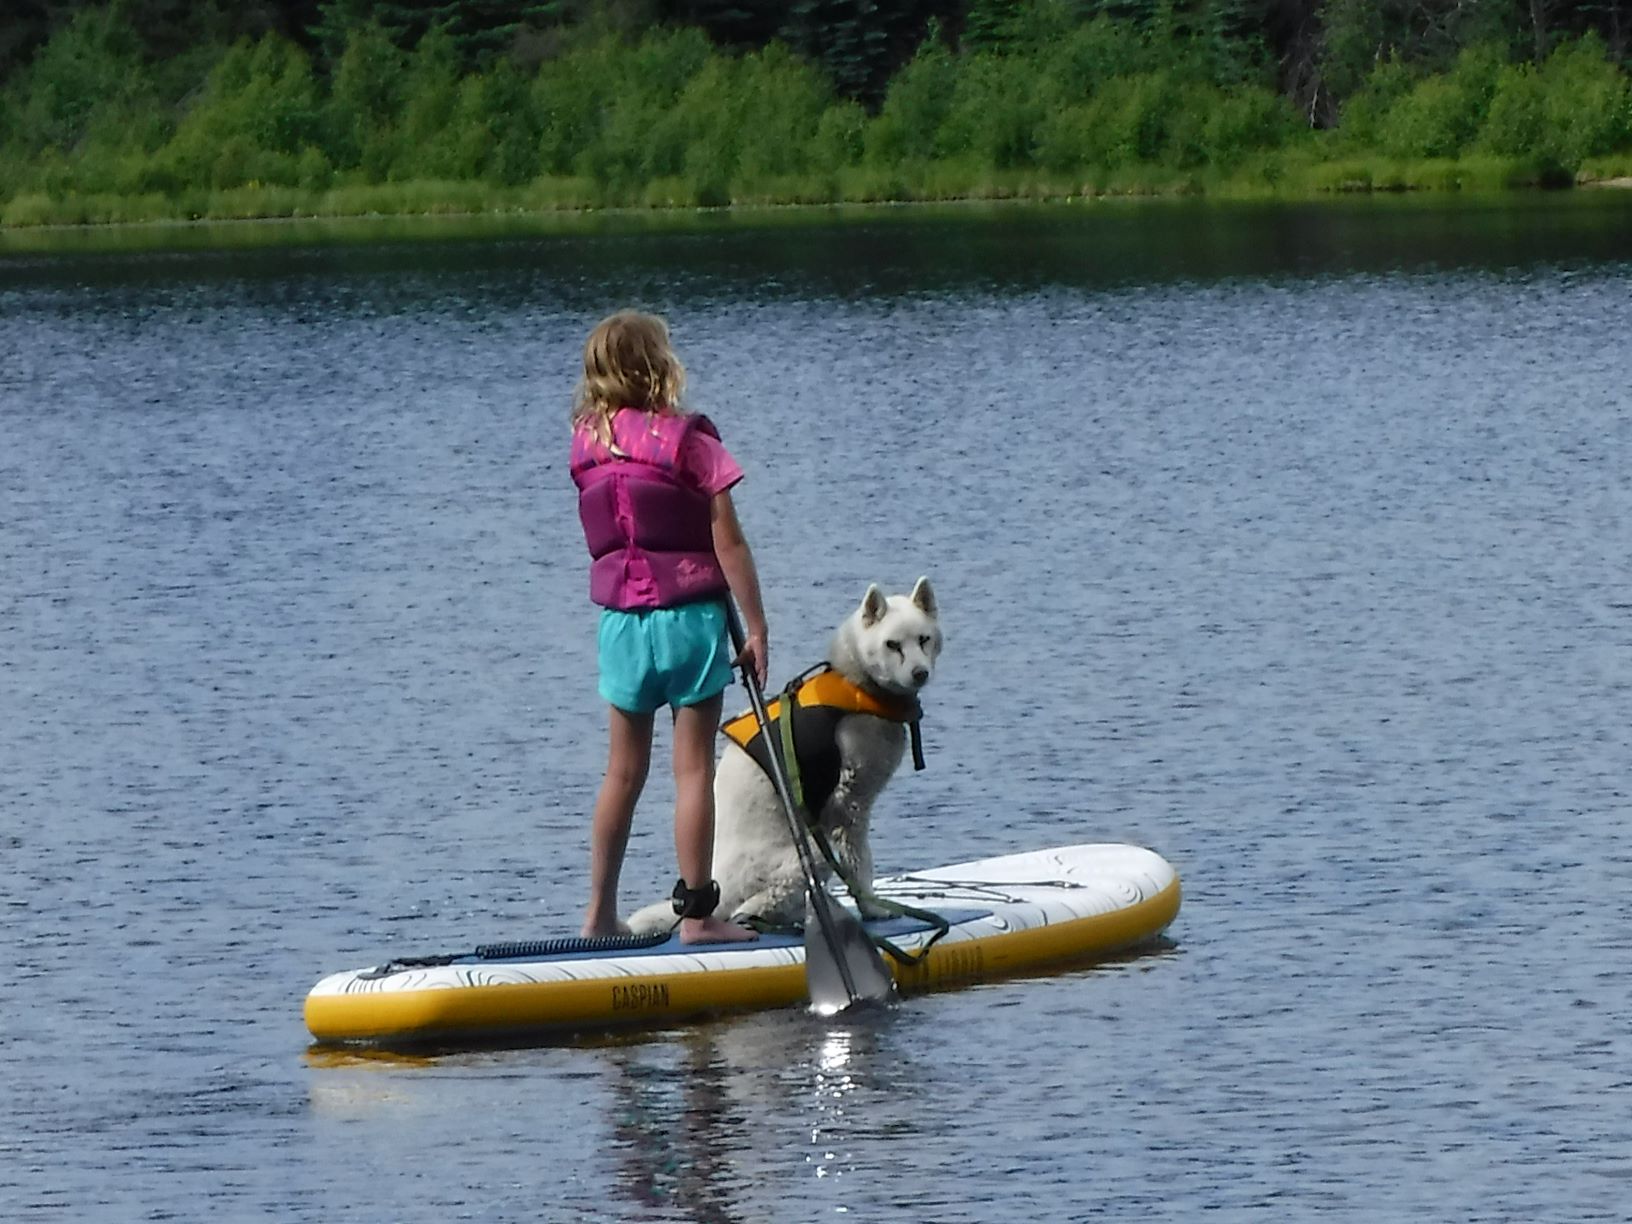 A little girl paddle-boarding with her dog on a lake.